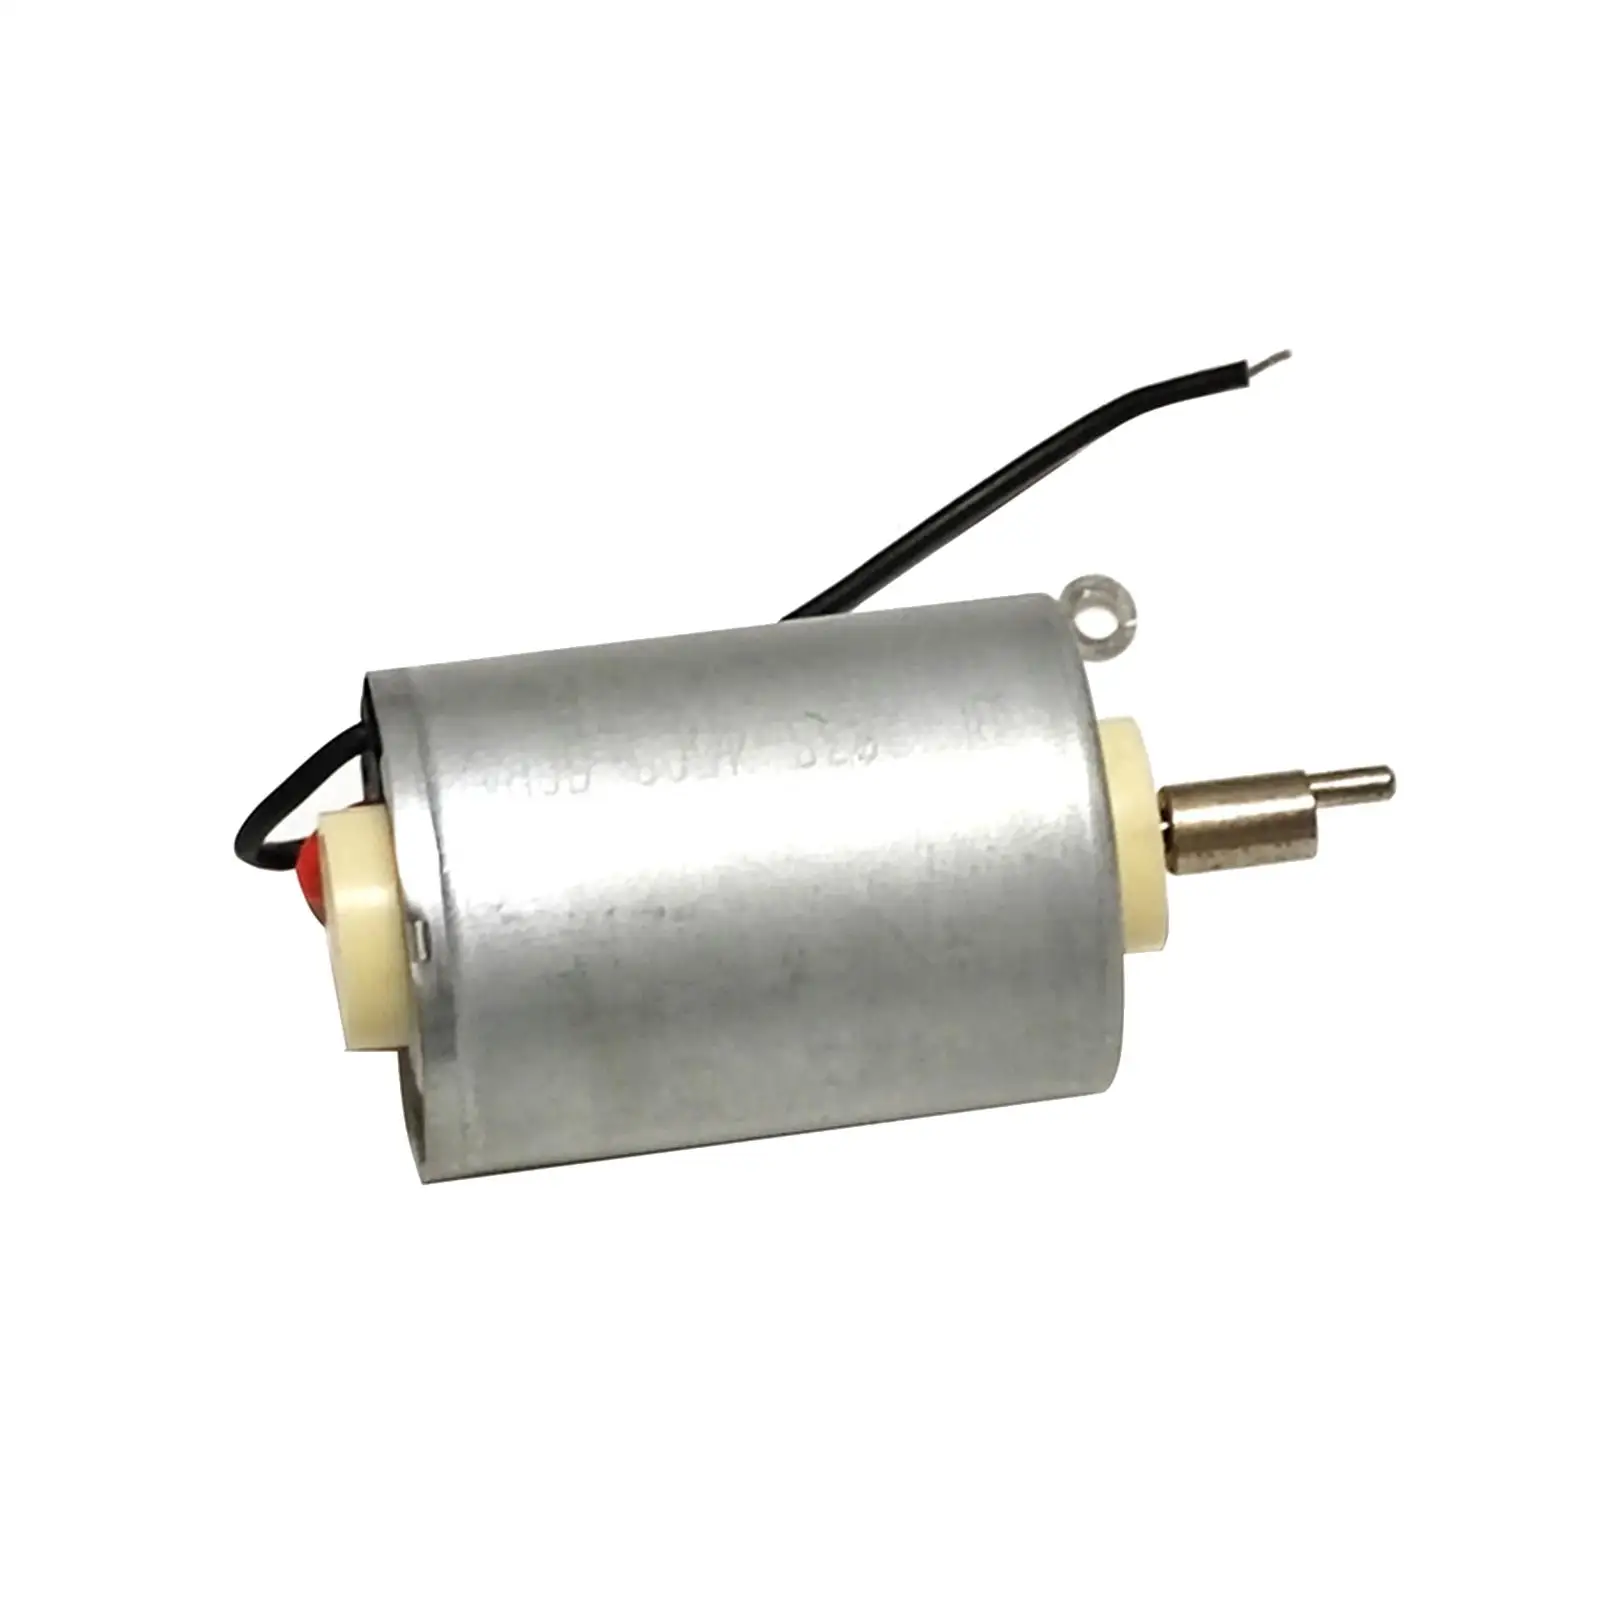 Motor for Hair Clippers Maintenance High Performance DIY DC 3.7V Repair Parts Upgrade Rotary Motor for 8148 8509 8591 2245 8504